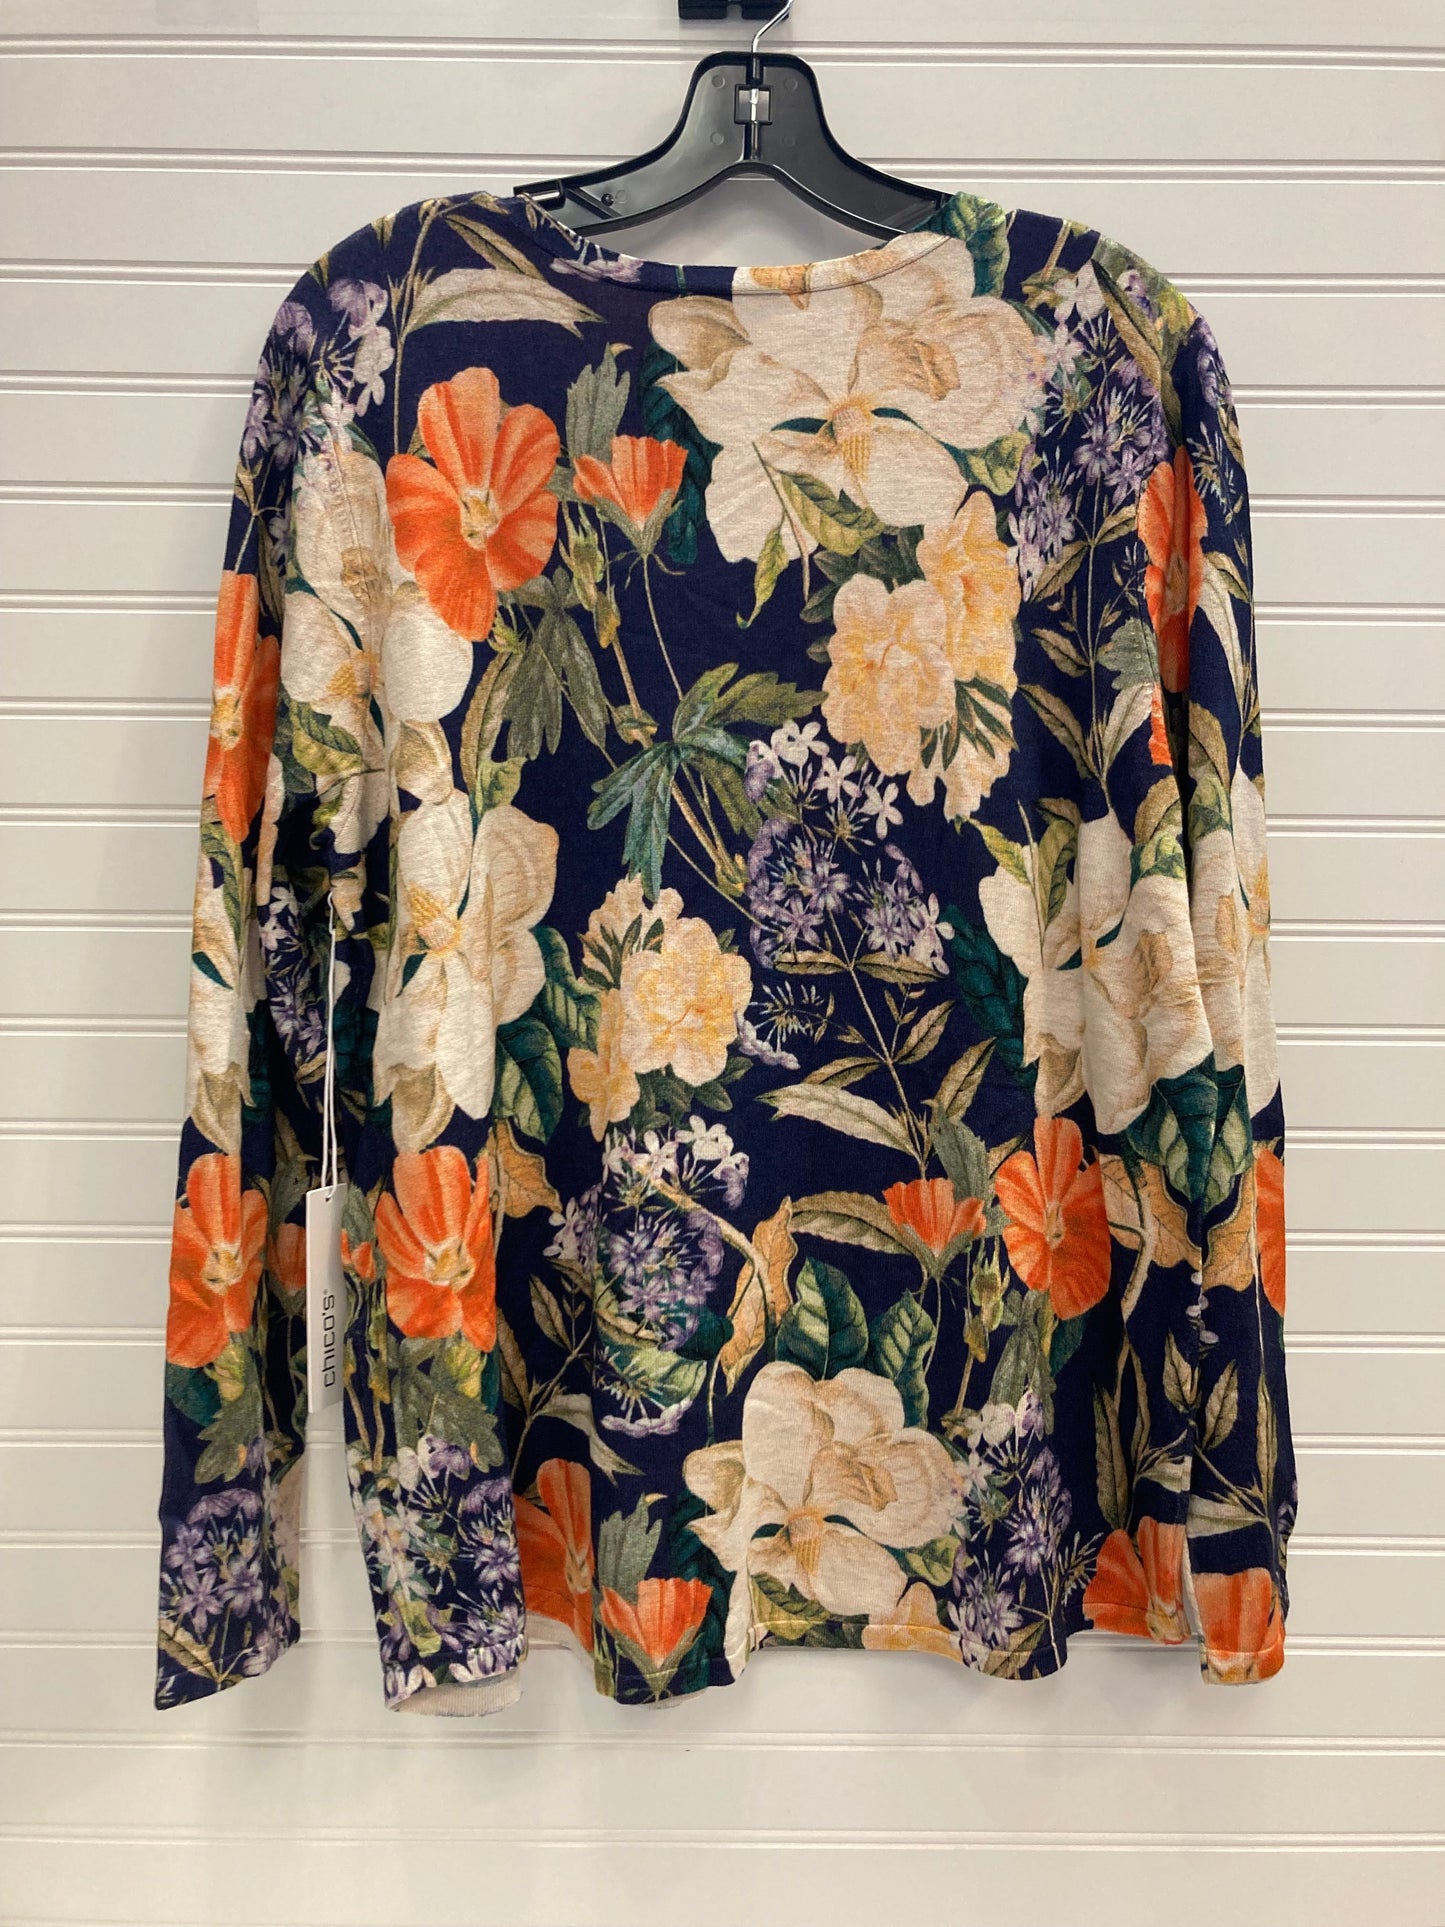 Multi-colored Top Long Sleeve Chicos, Size Xl